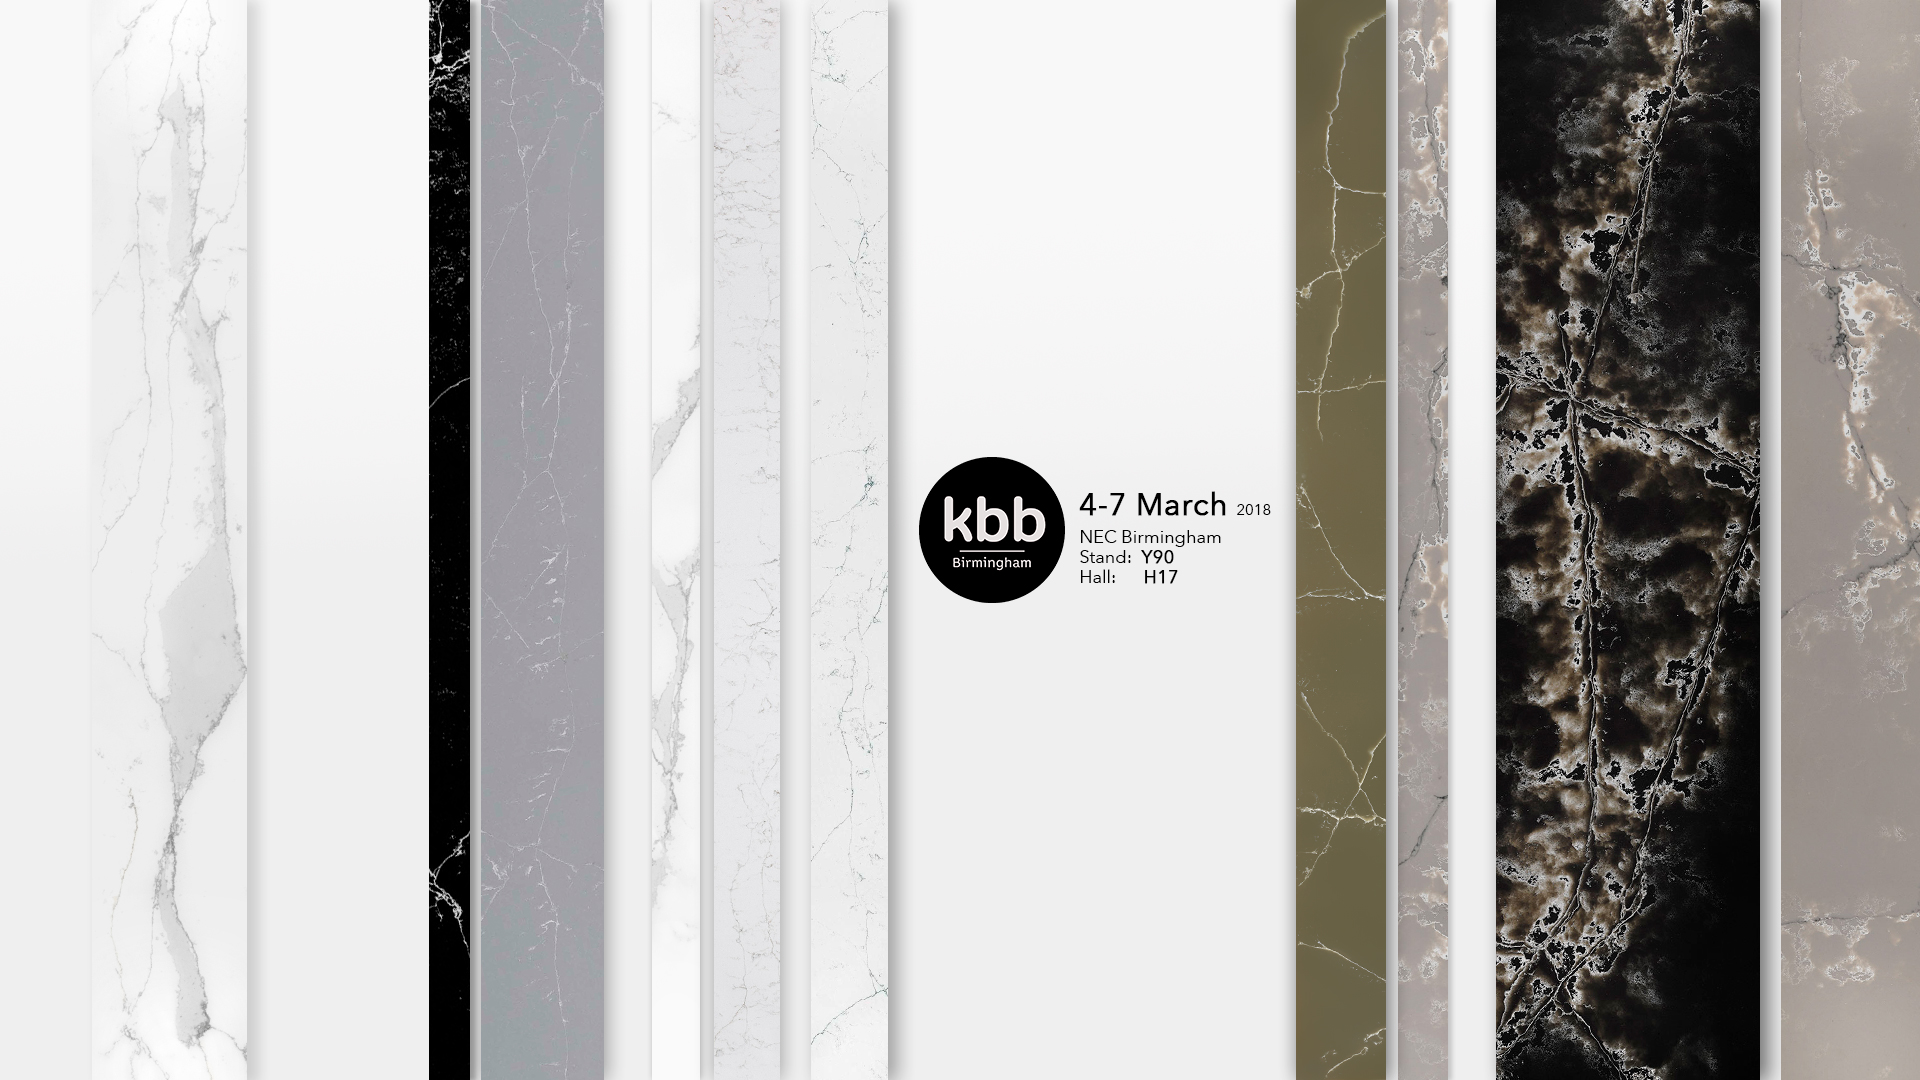 KBB BIRMINGHAM: The best of Kitchen, Bathroom, and Bedroom all in one